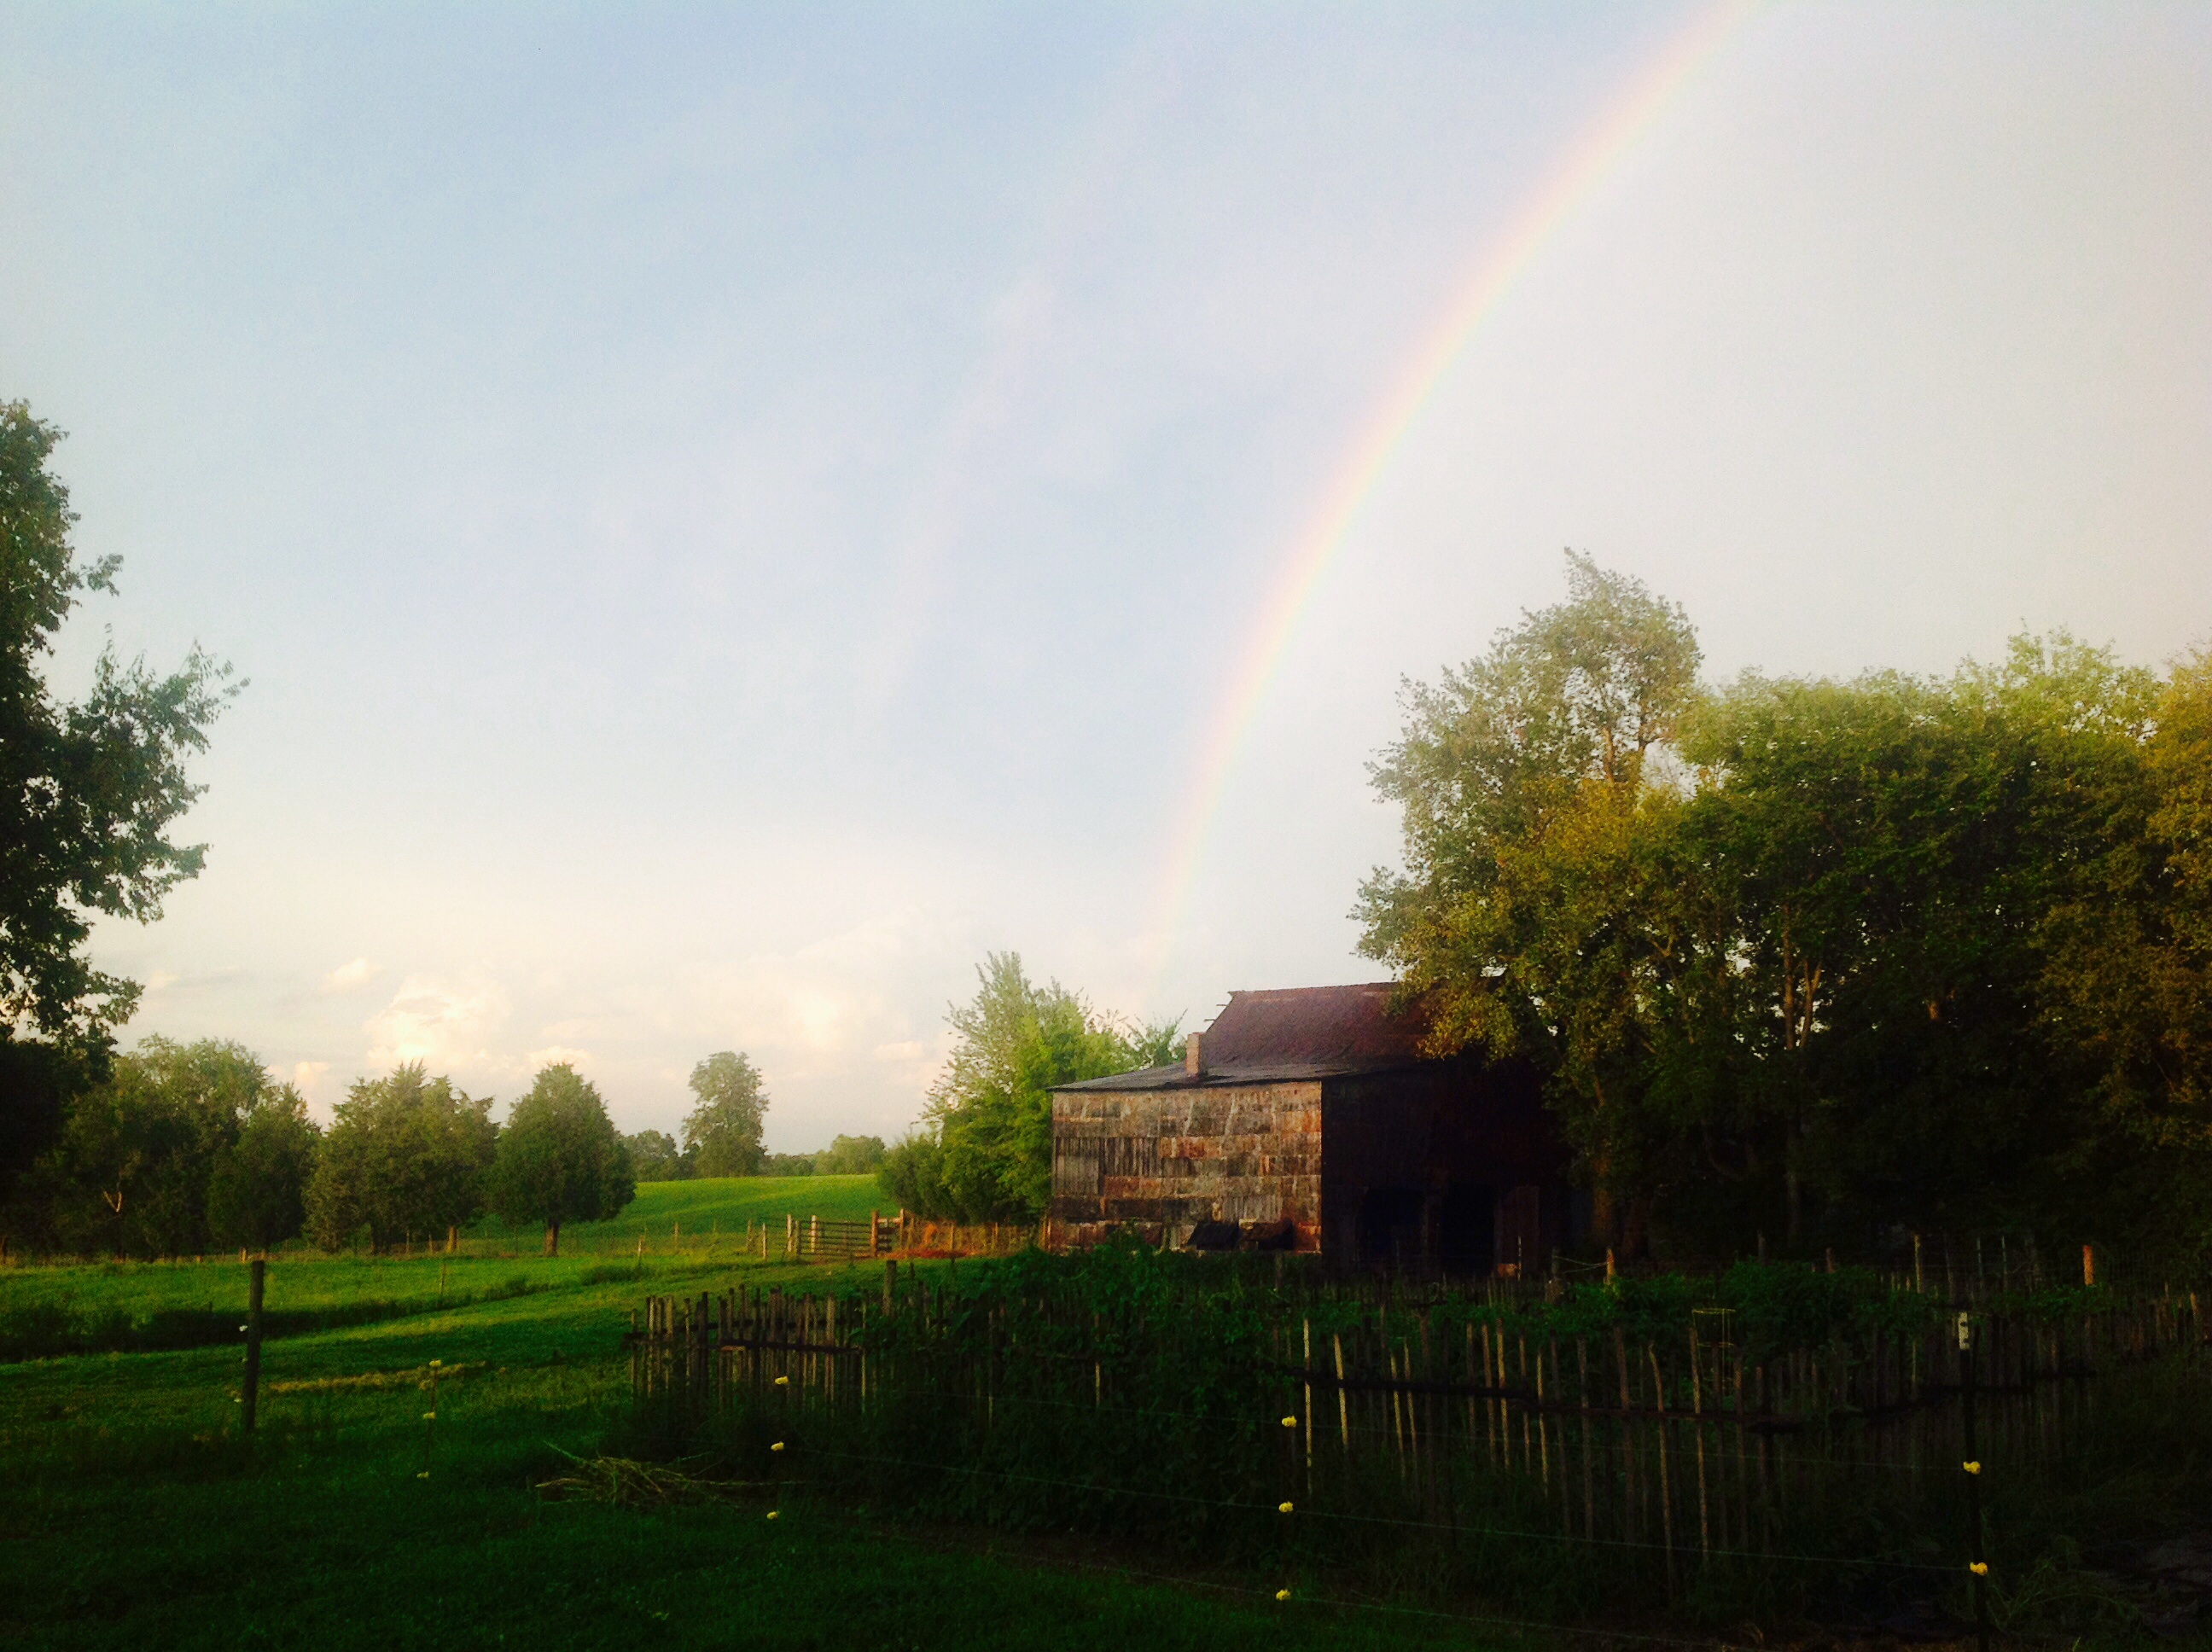 A lovely double rainbow after a thunderstorm at my farm.